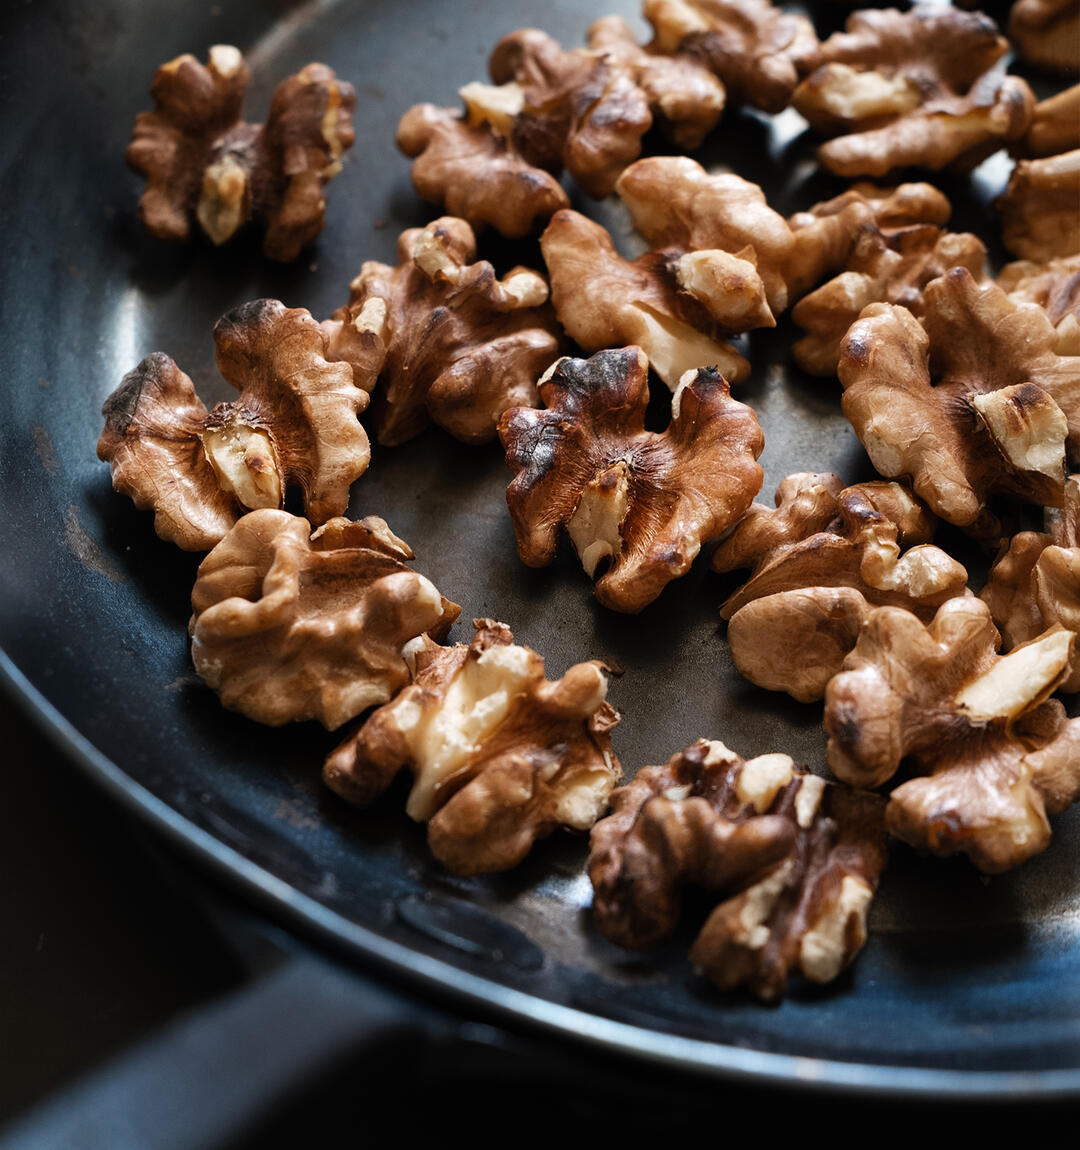 Toasted walnuts in a carbon steel pan